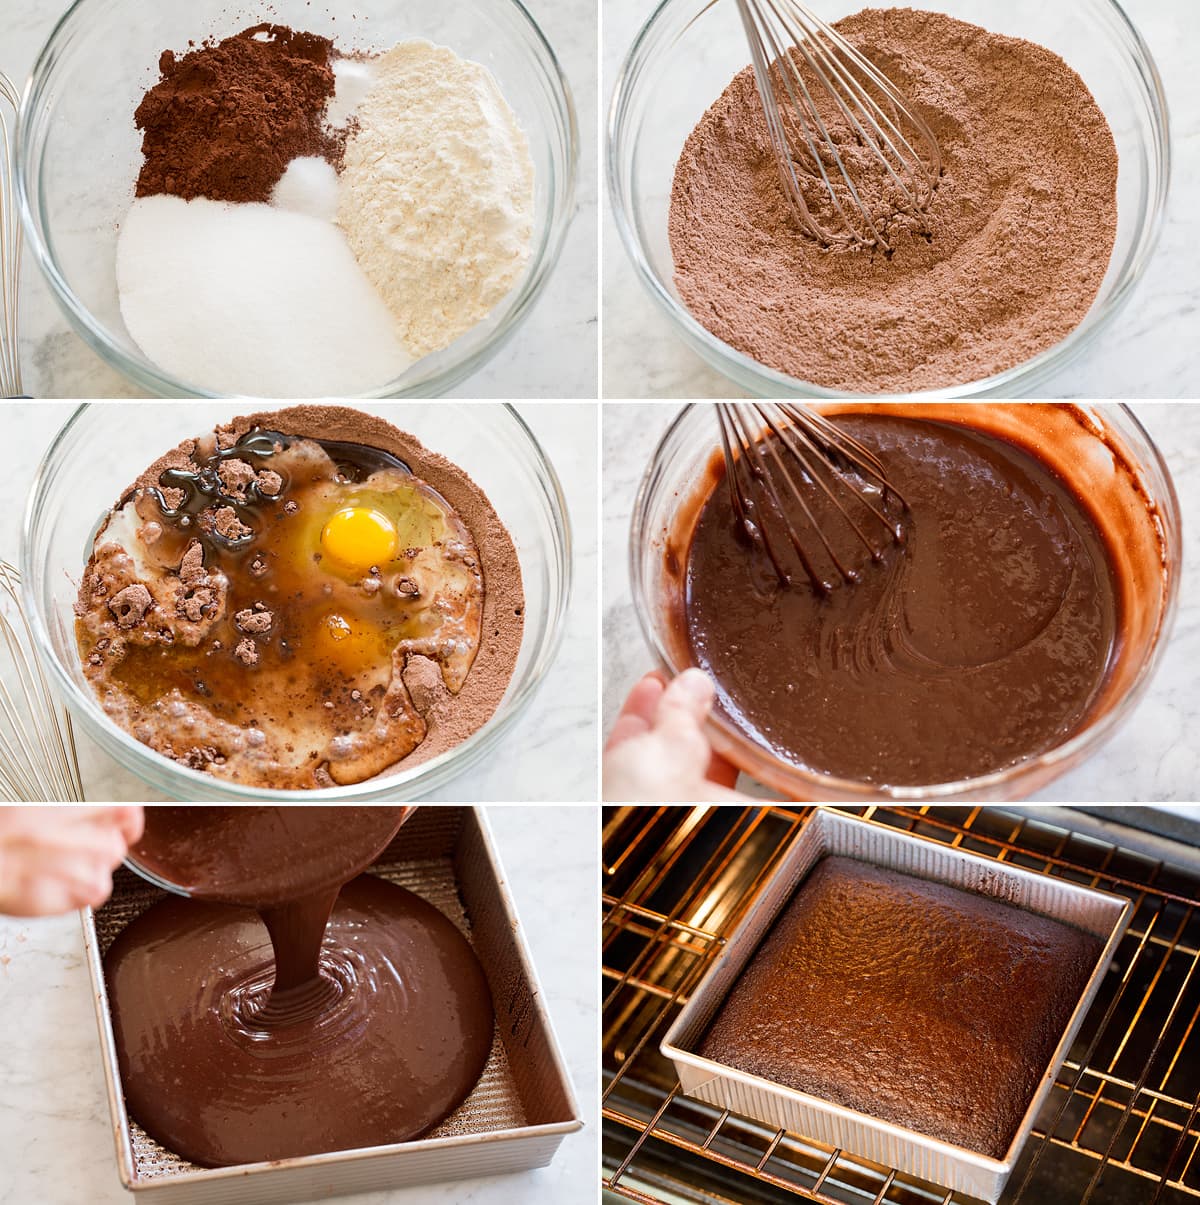 Six photos showing steps of making easy chocolate cake batter and baking.